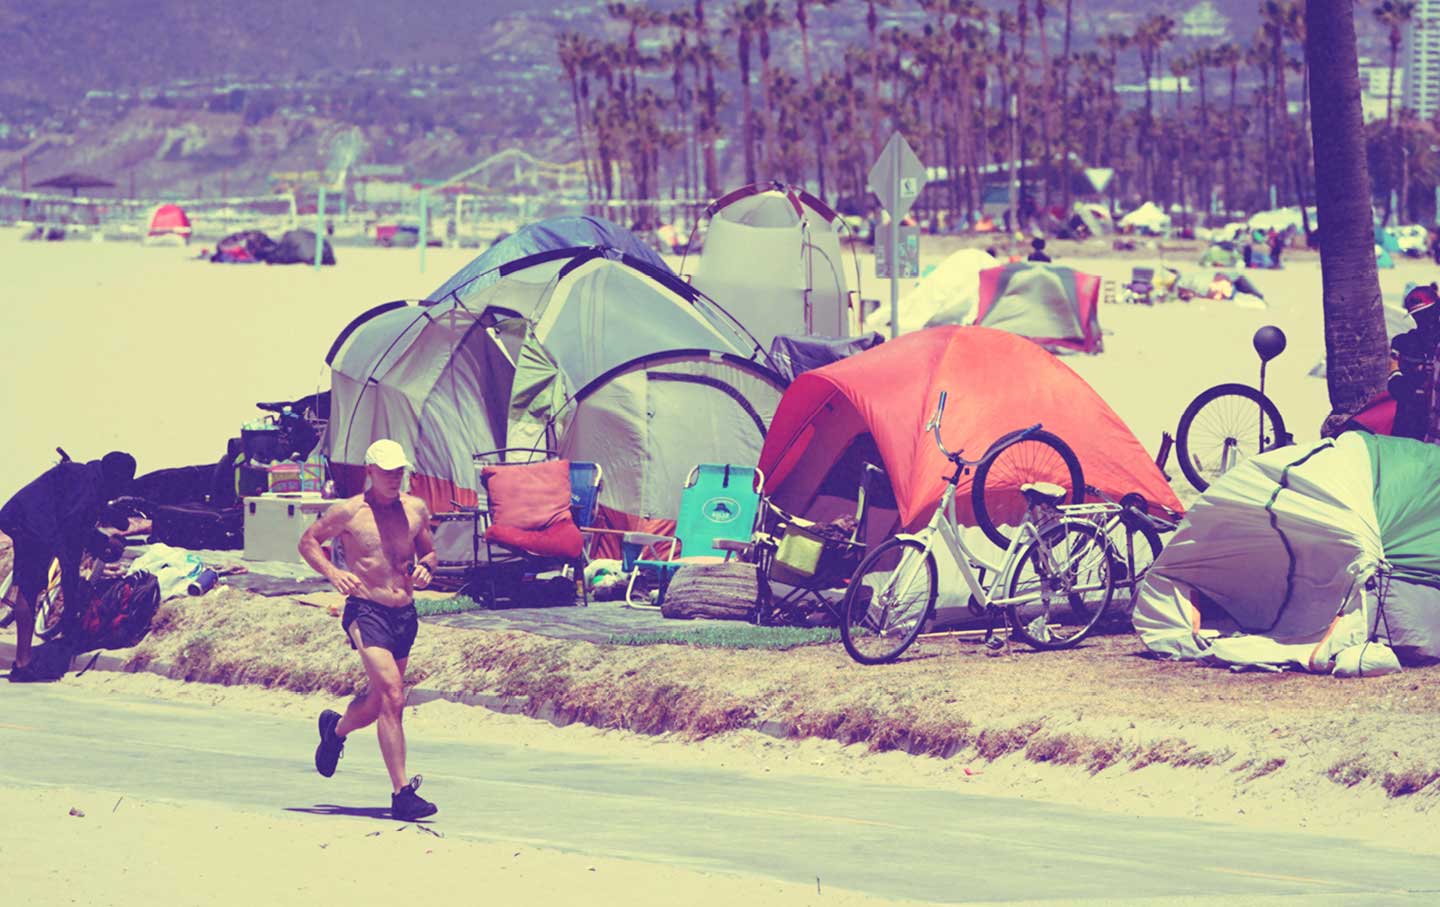 The Tents of Venice Beach